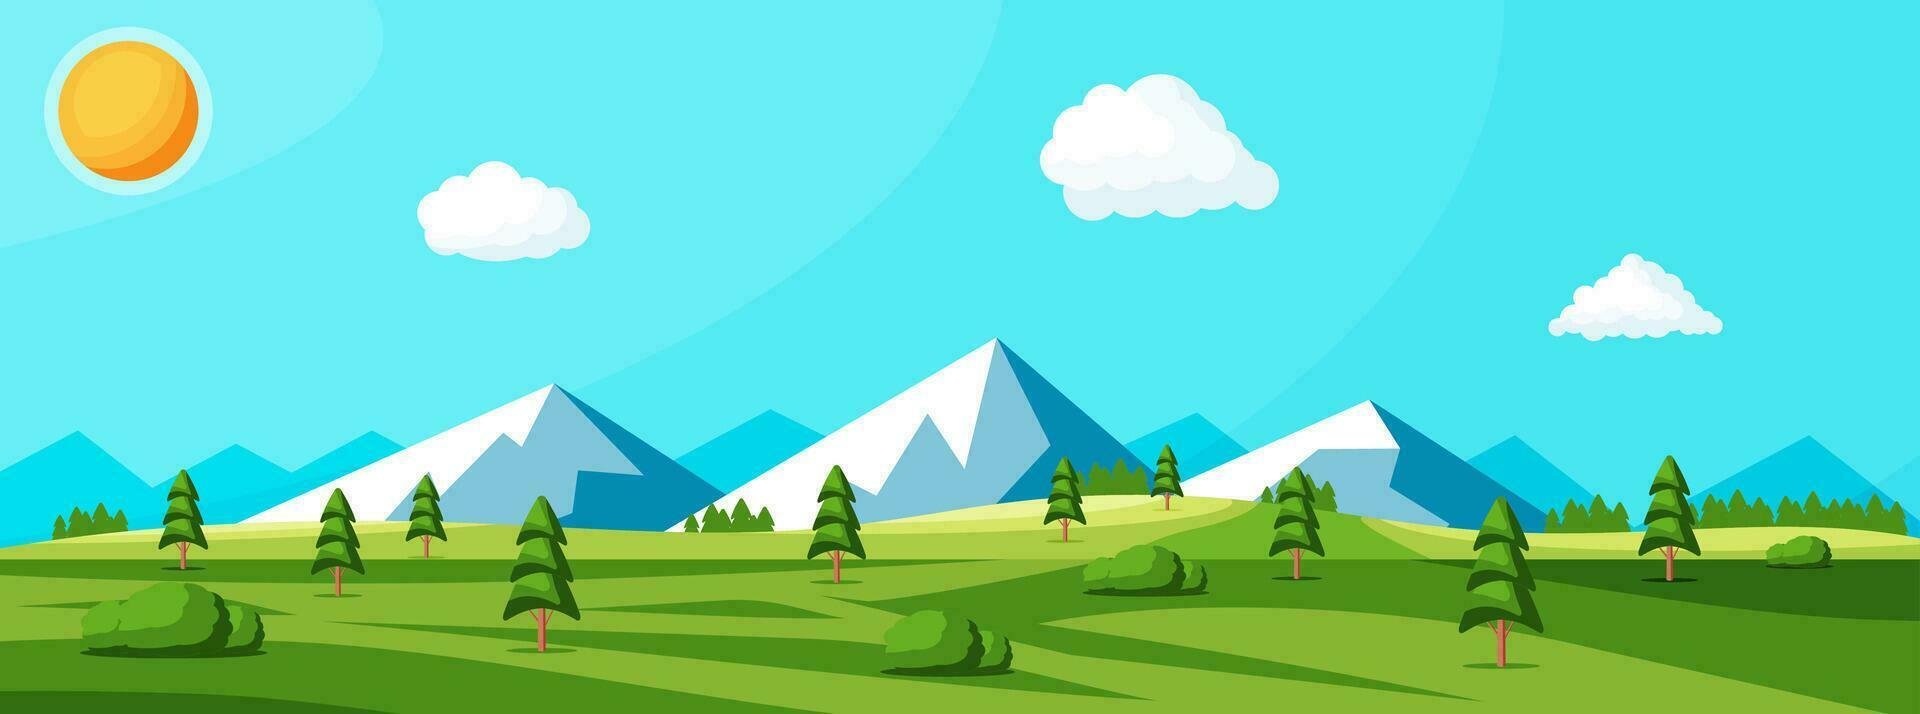 Landscape Of Mountains And Green Hills. Summer Nature Landscape With Rocks, Forest, Grass, Sun, Sky and Clouds. National Park or Nature Reserve. Vector Illustration In Flat Style